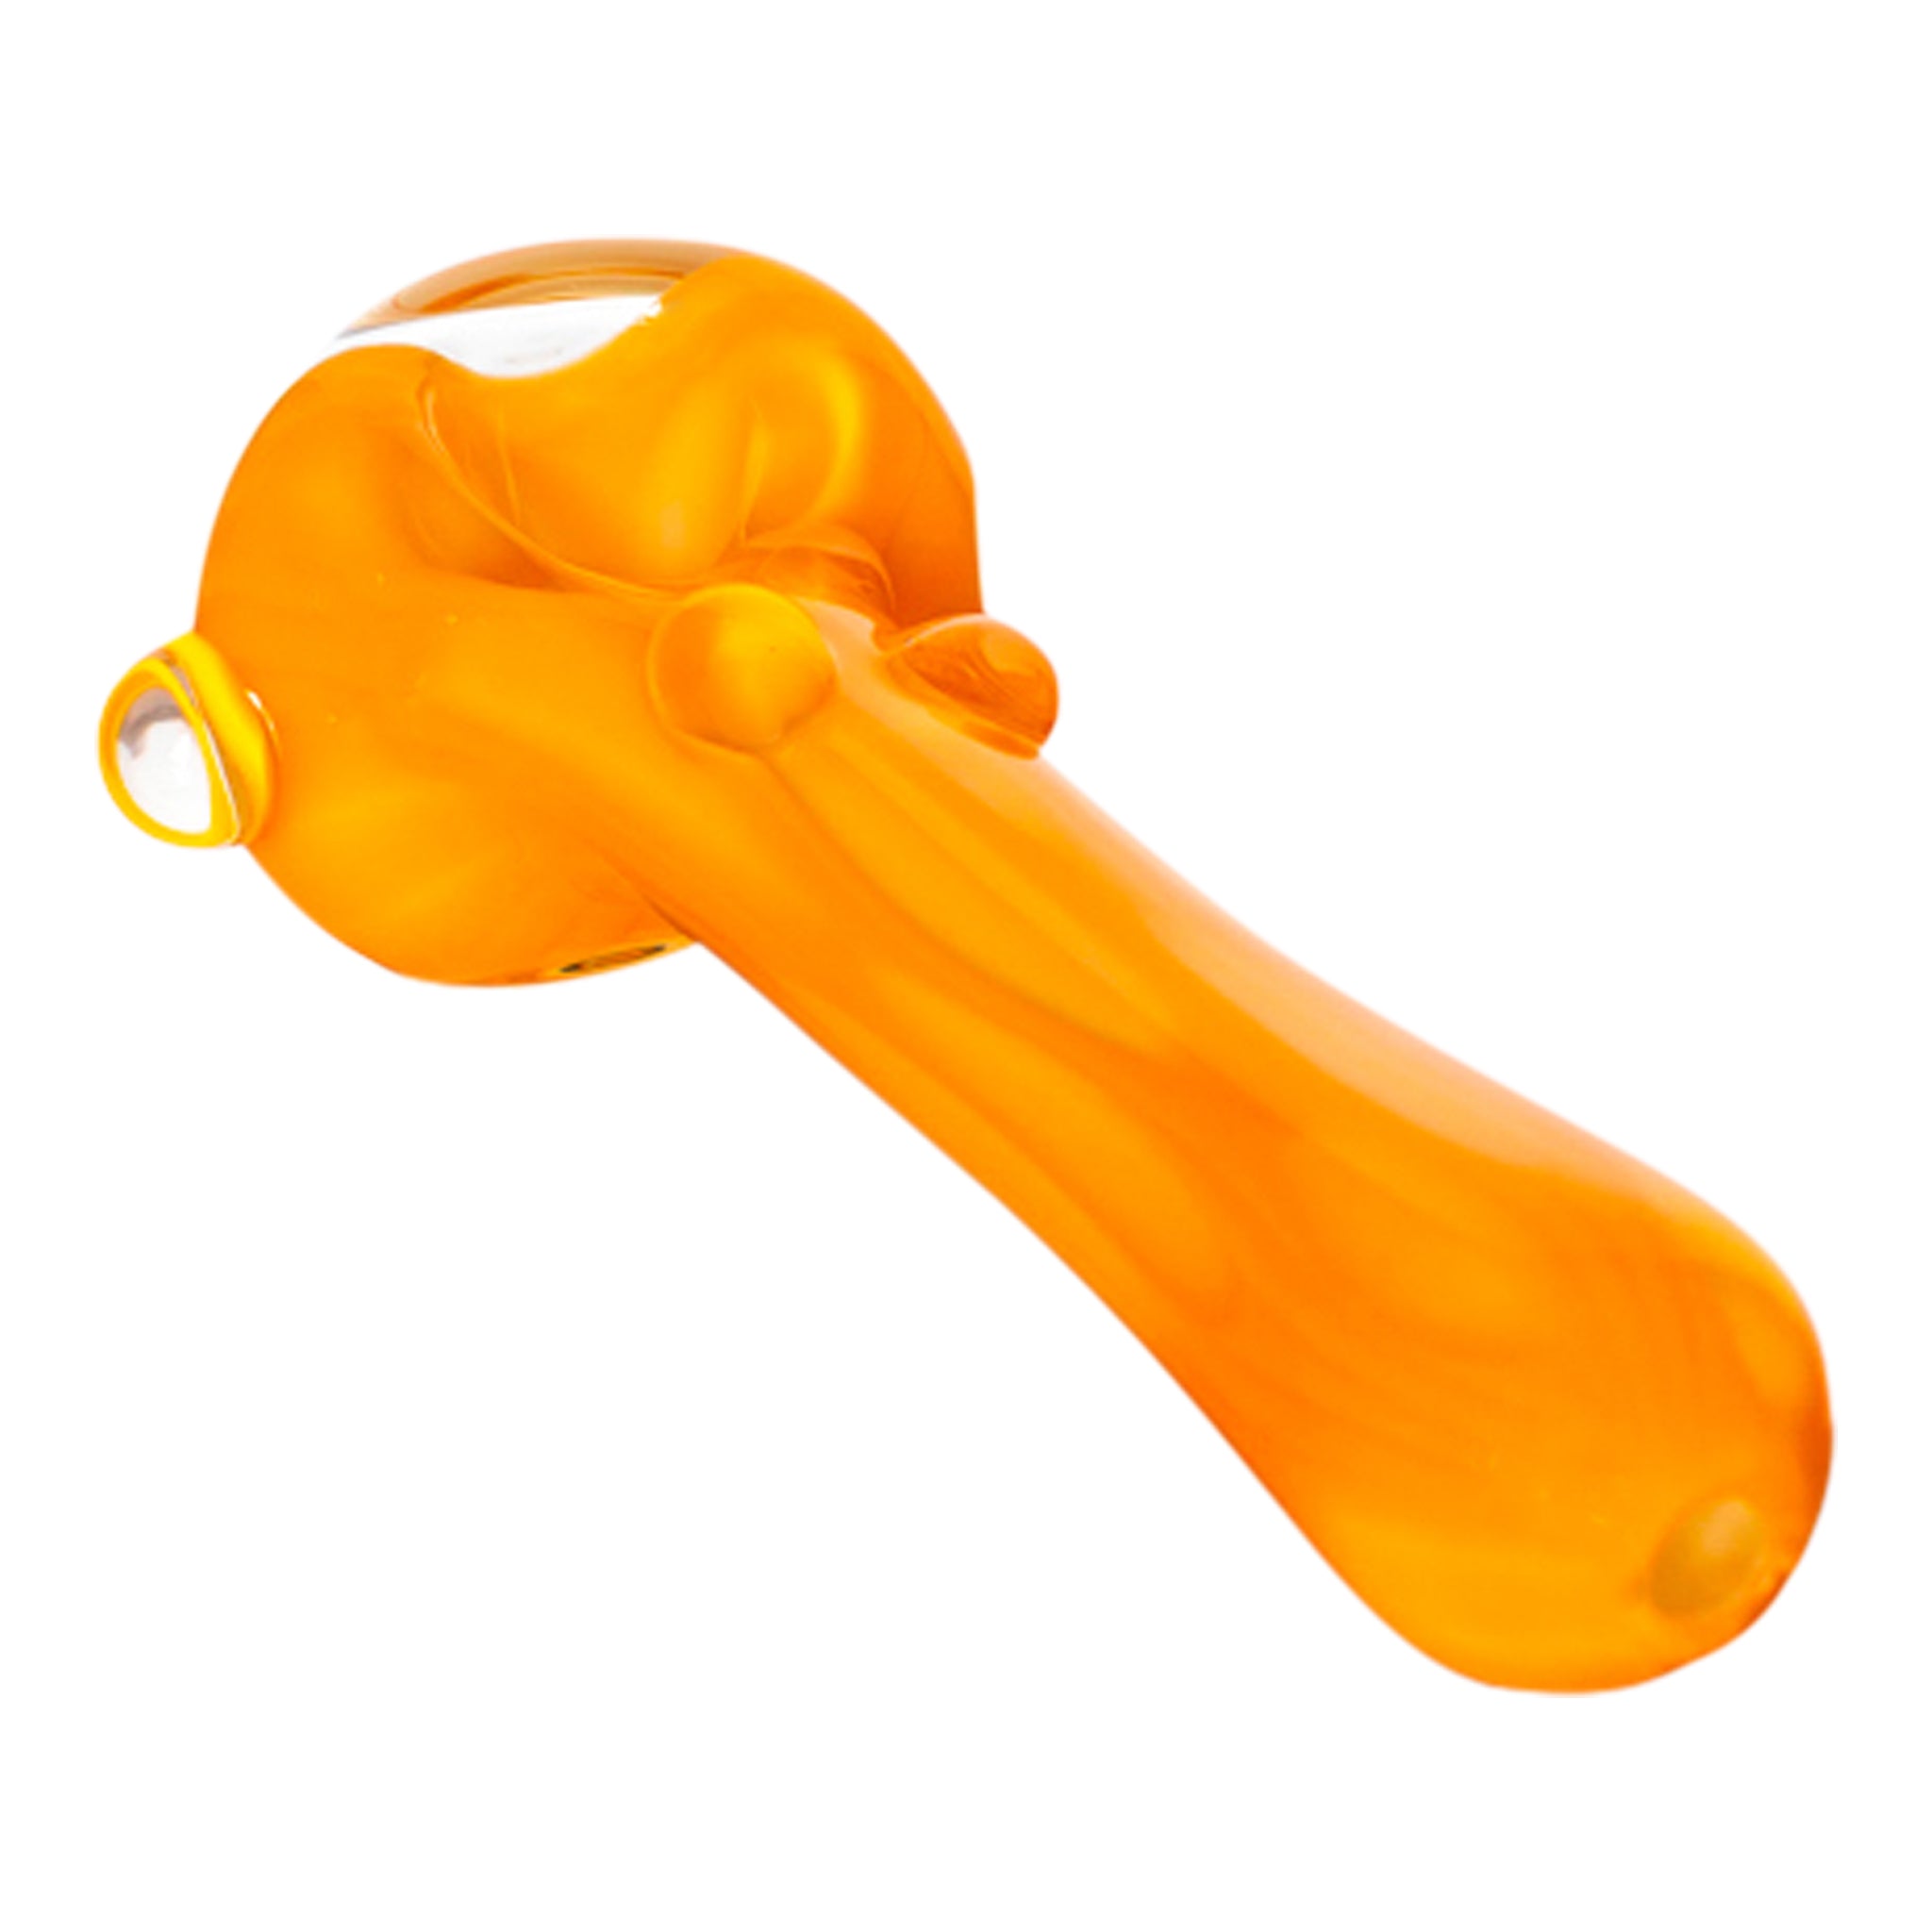 ELEV8 Honeycomb Pipe - 5in Yellow